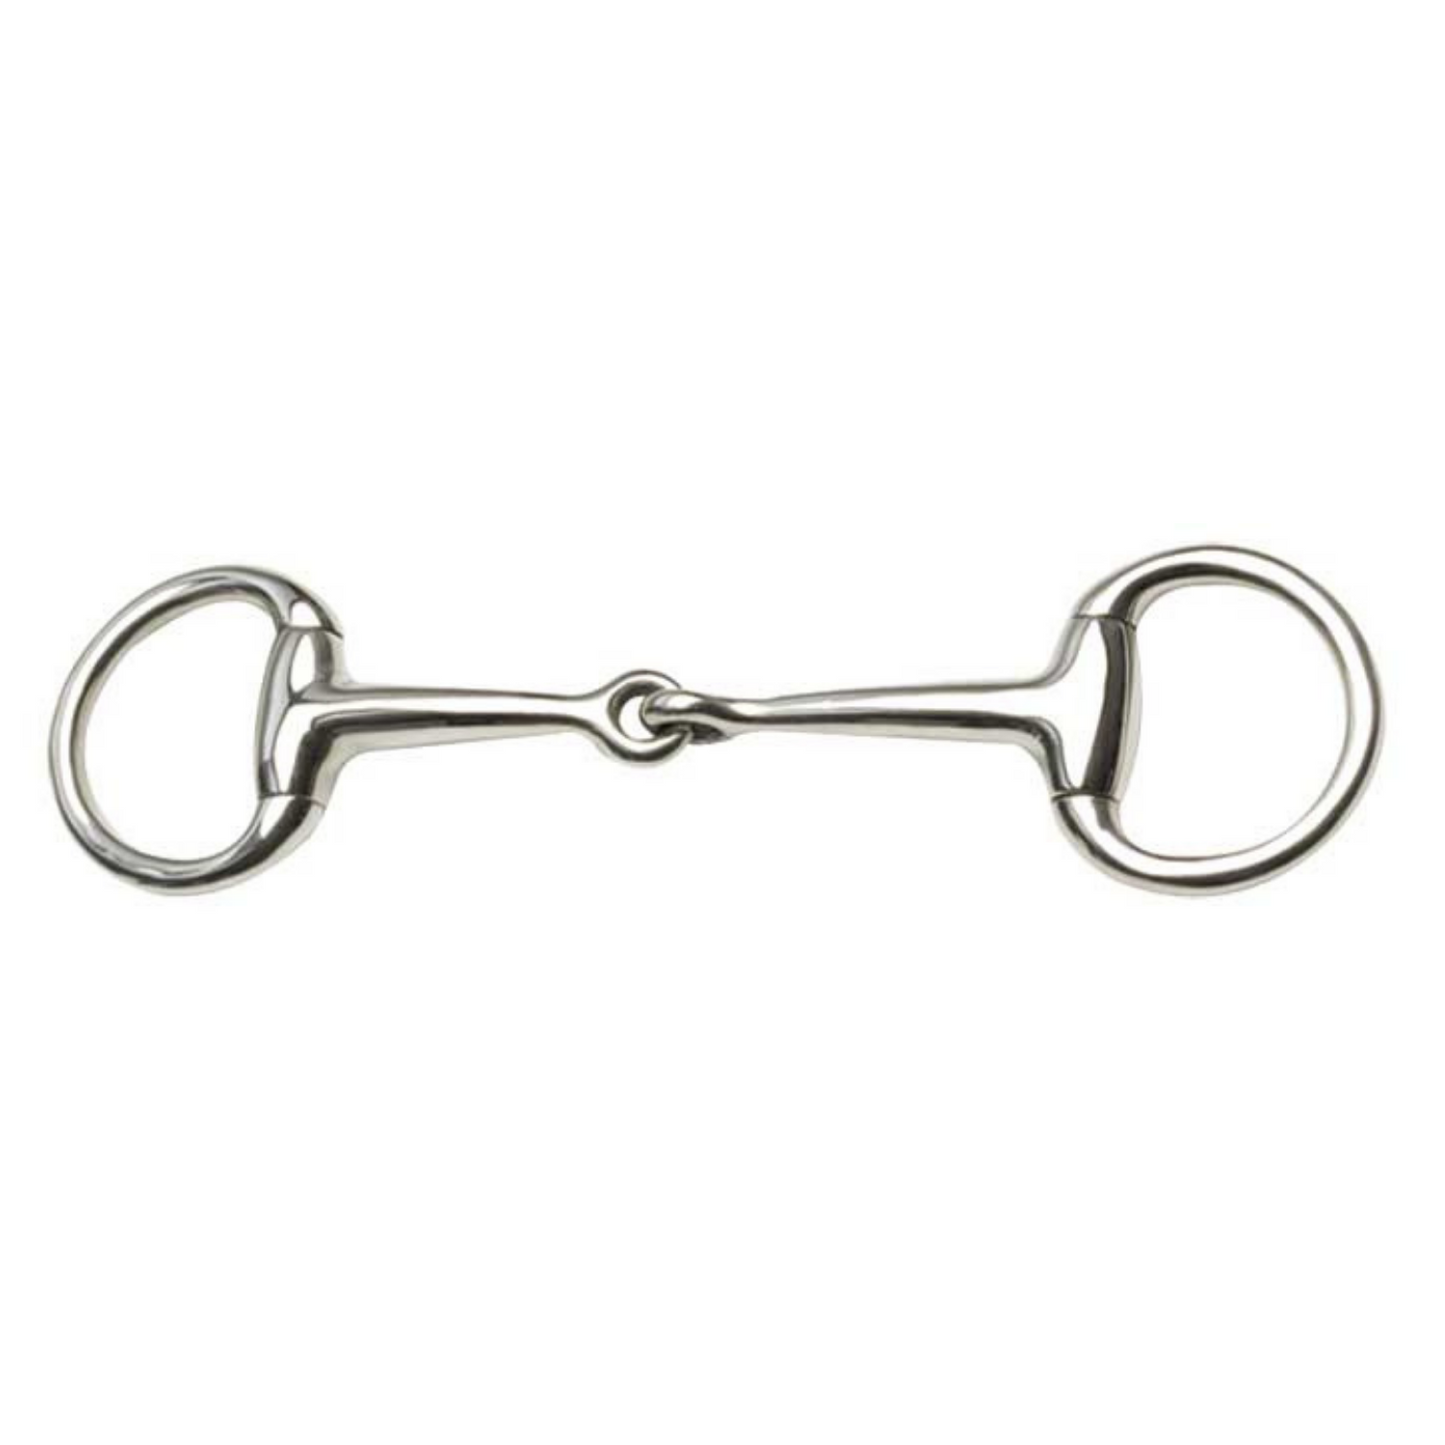 Zilco Dressage Eggbutt Fine Mouth - Small Rings